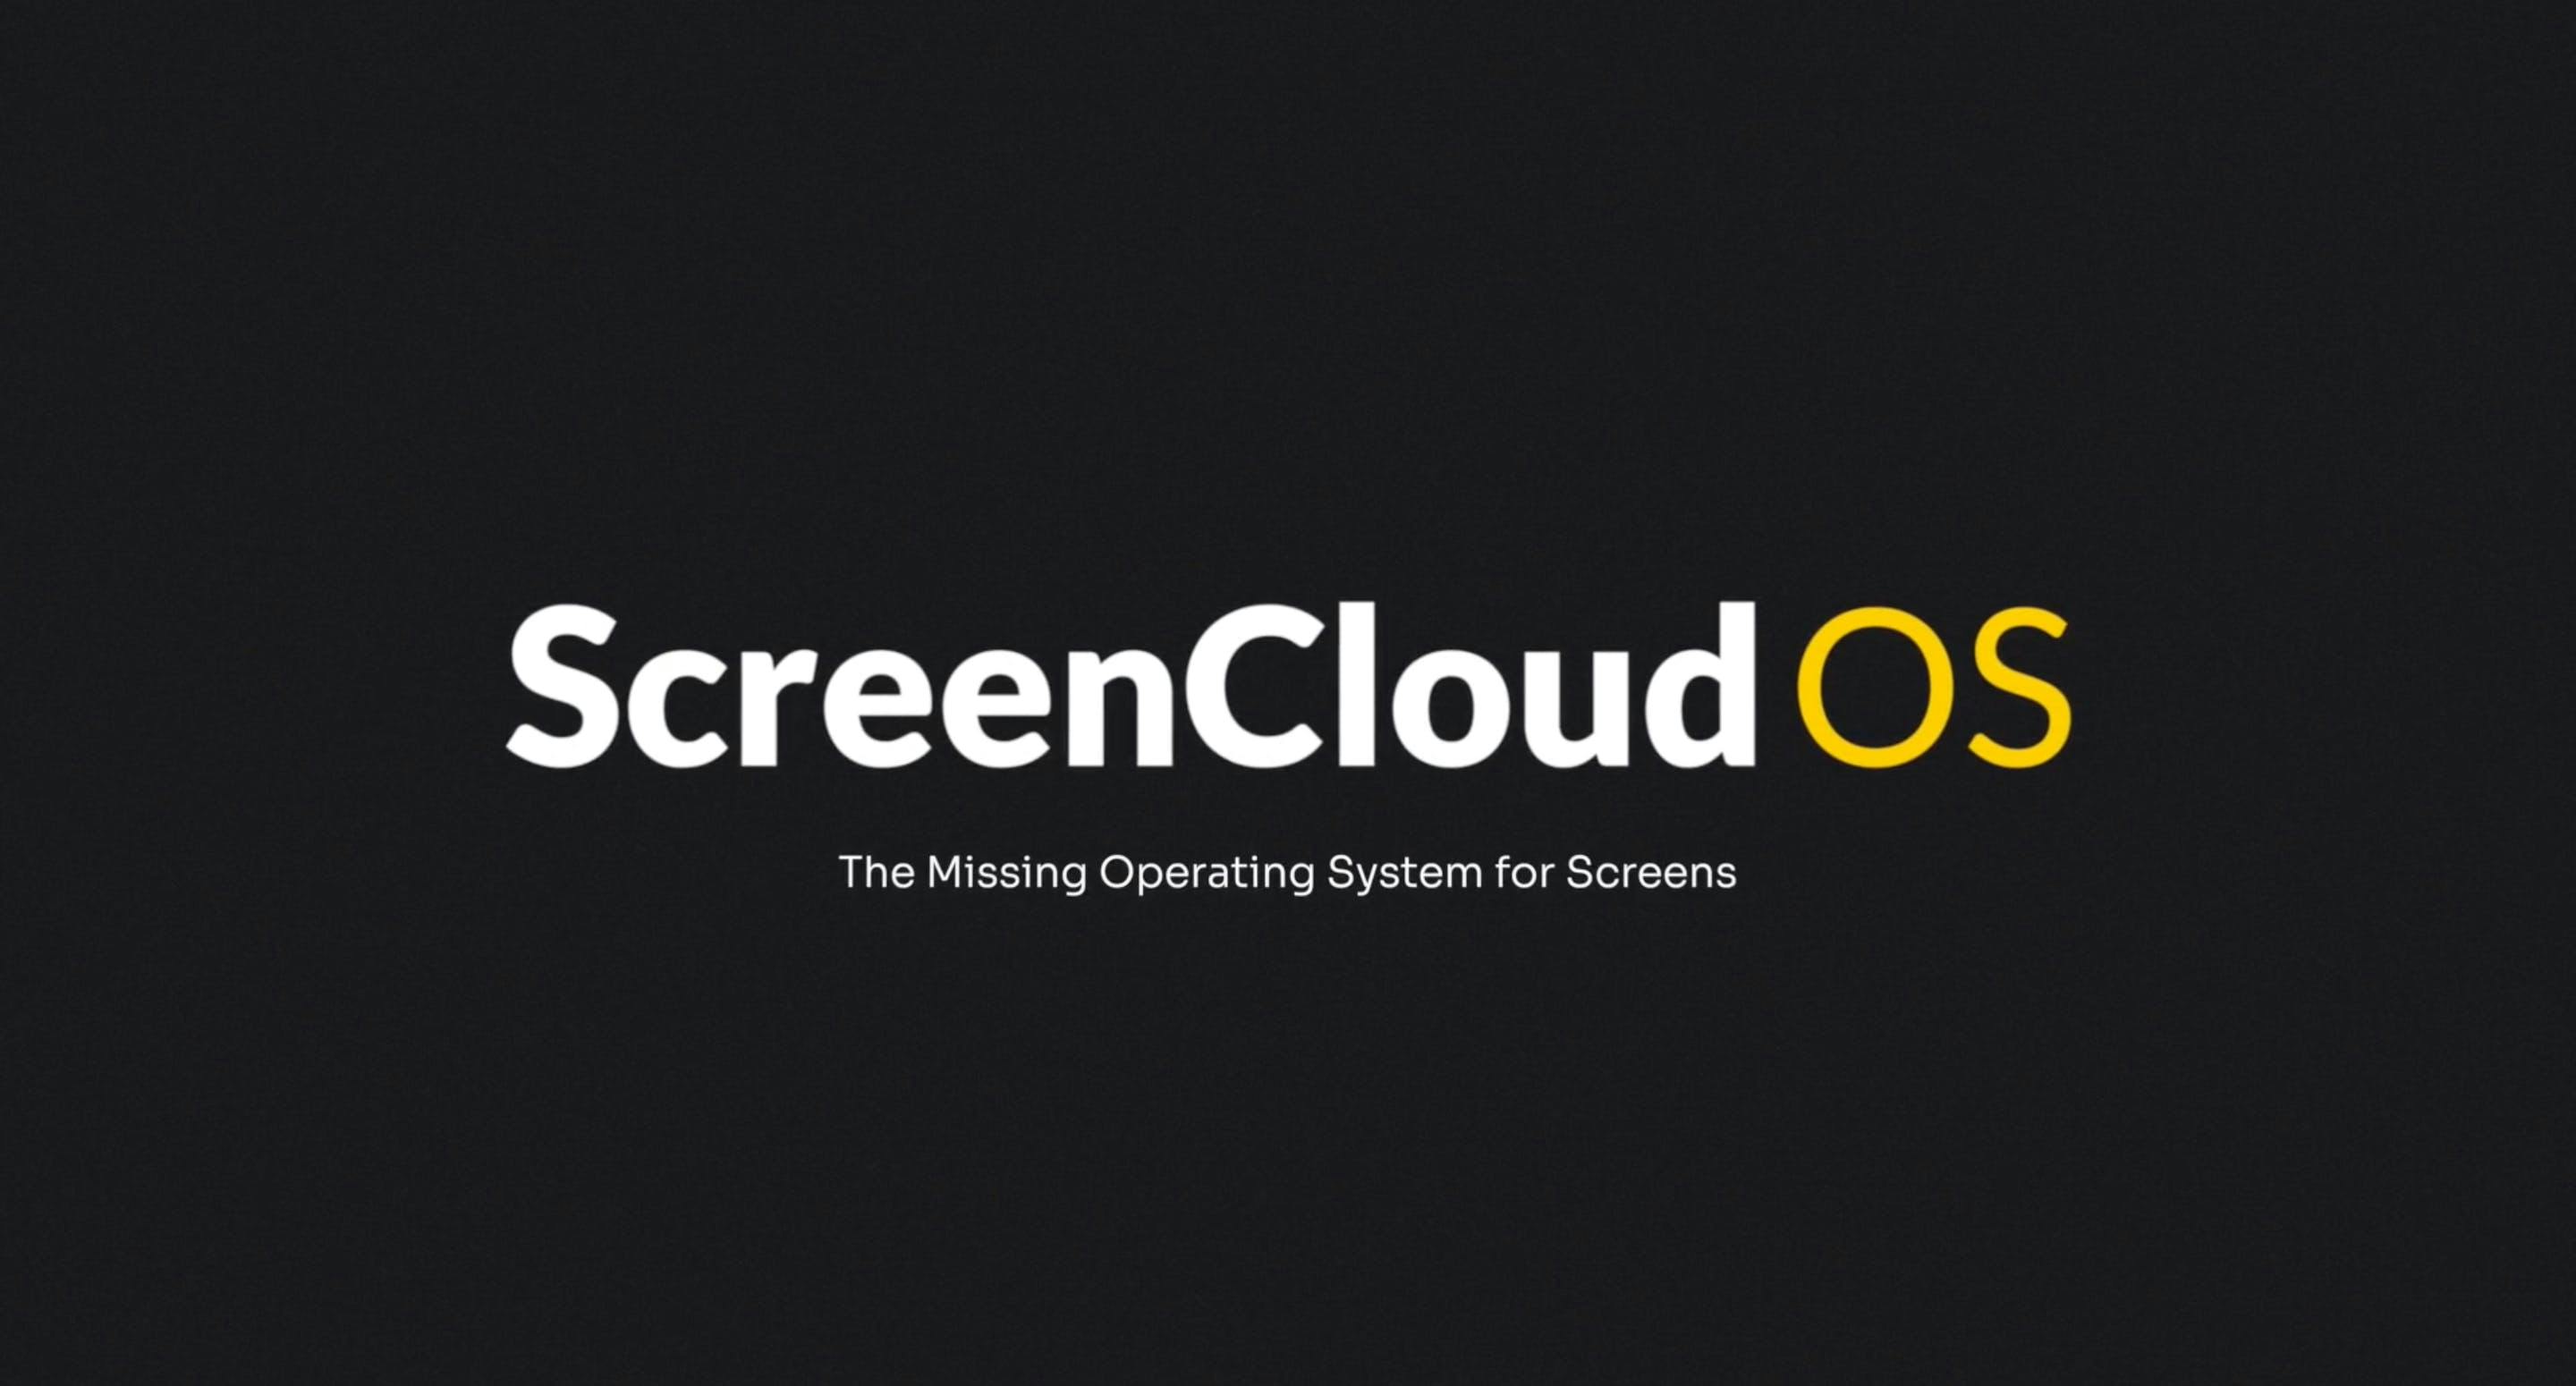 ScreenCloud Article - ScreenCloud OS: The Essential Enterprise Tool for IT Leaders Driving Digital Transformation